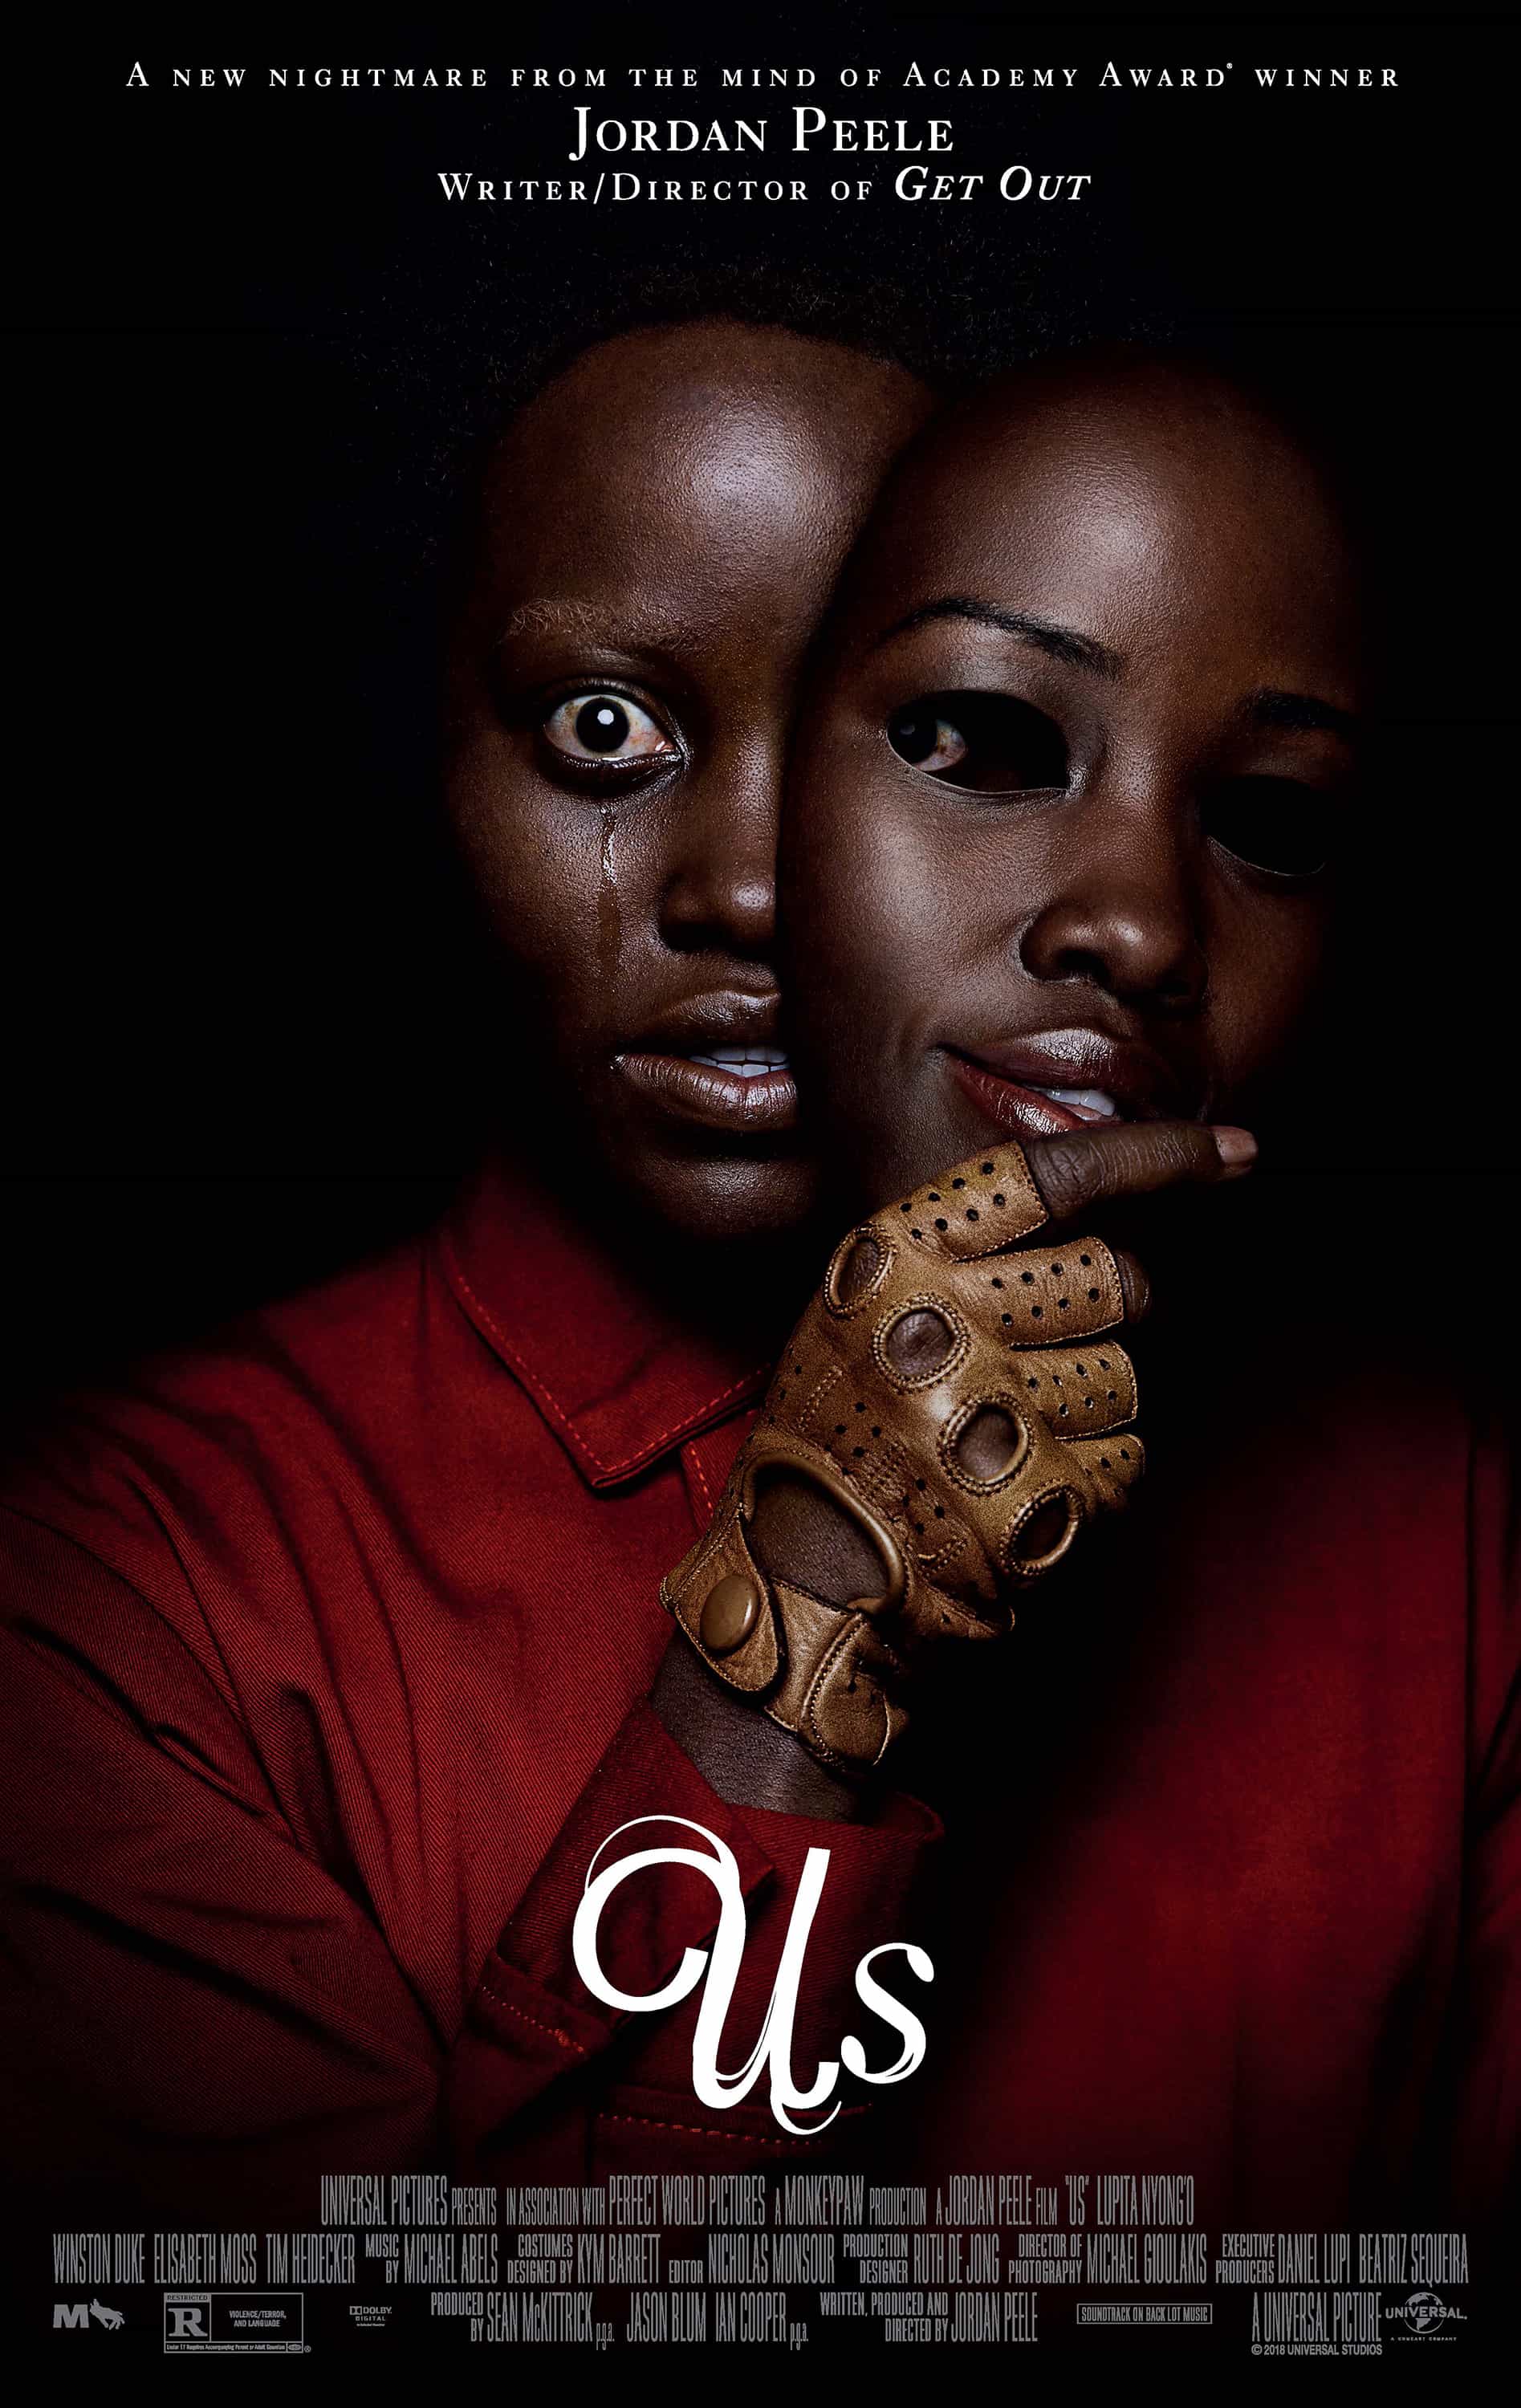 New 60 second trailer for Us from director Jordan Peele